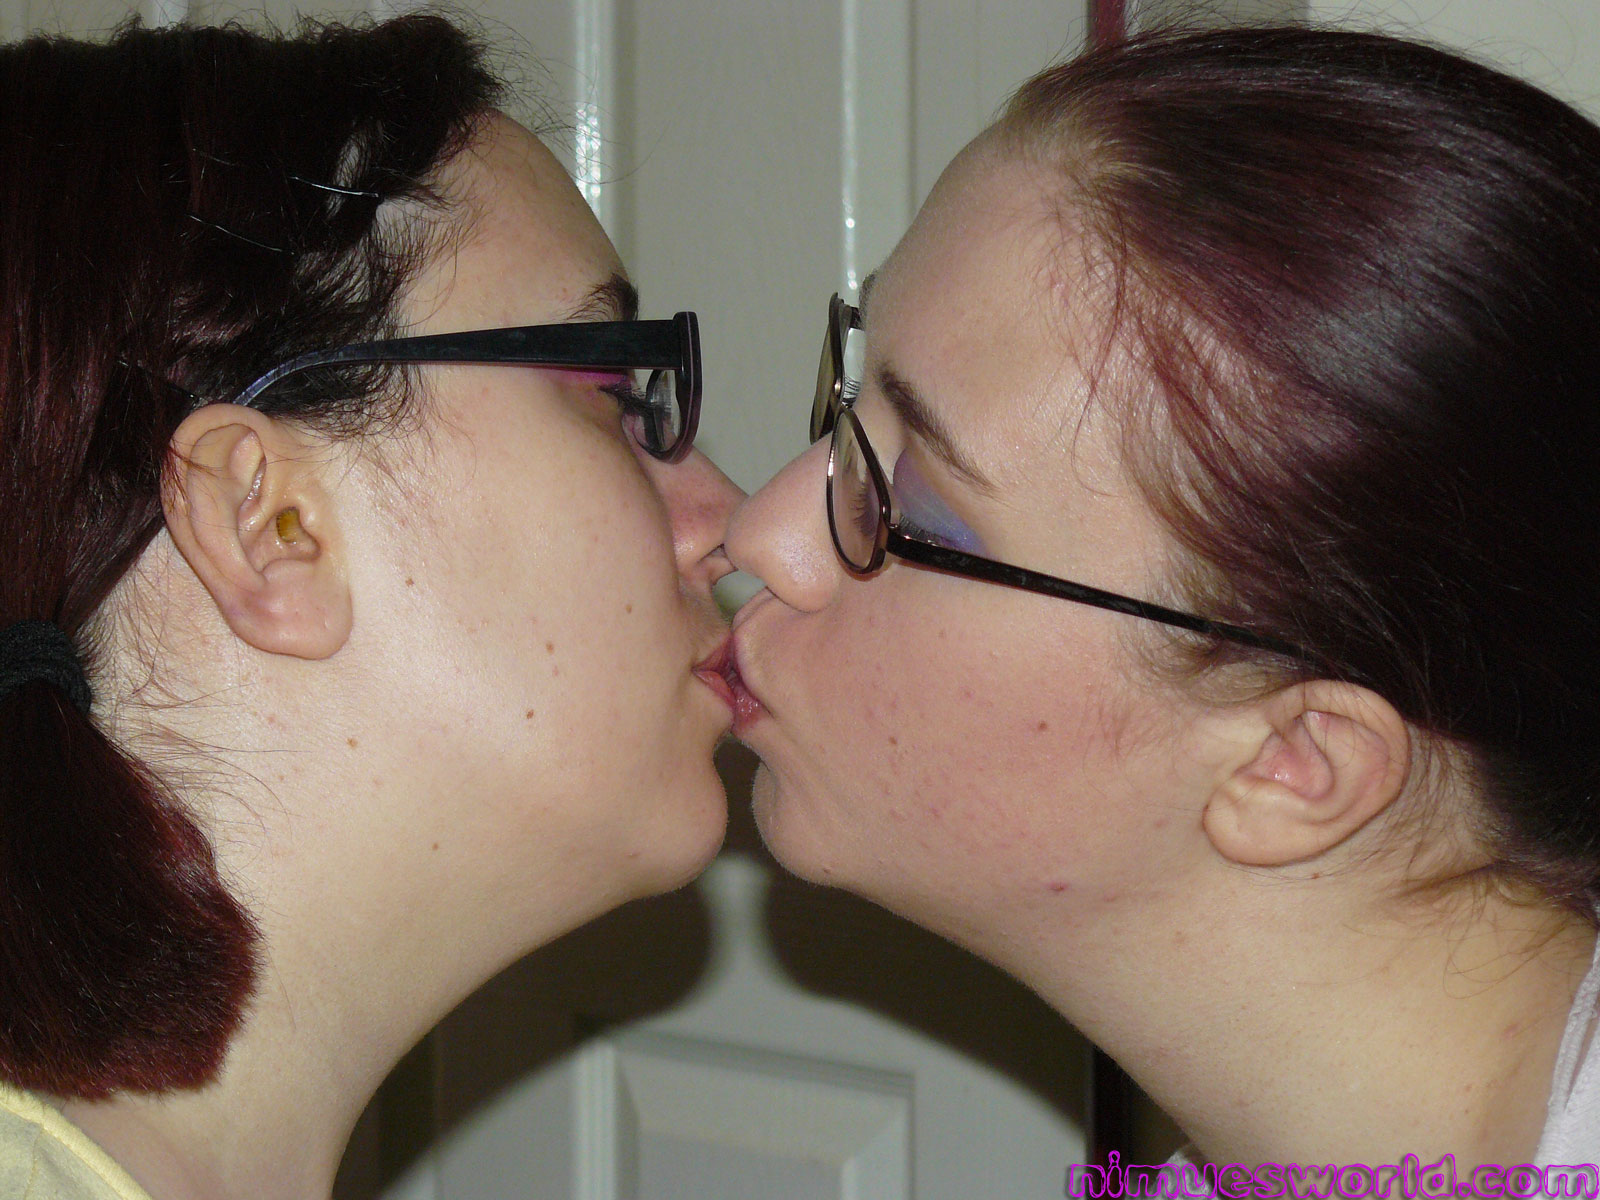 1600px x 1200px - Geeky Lesbians Kissing | College Beauty College